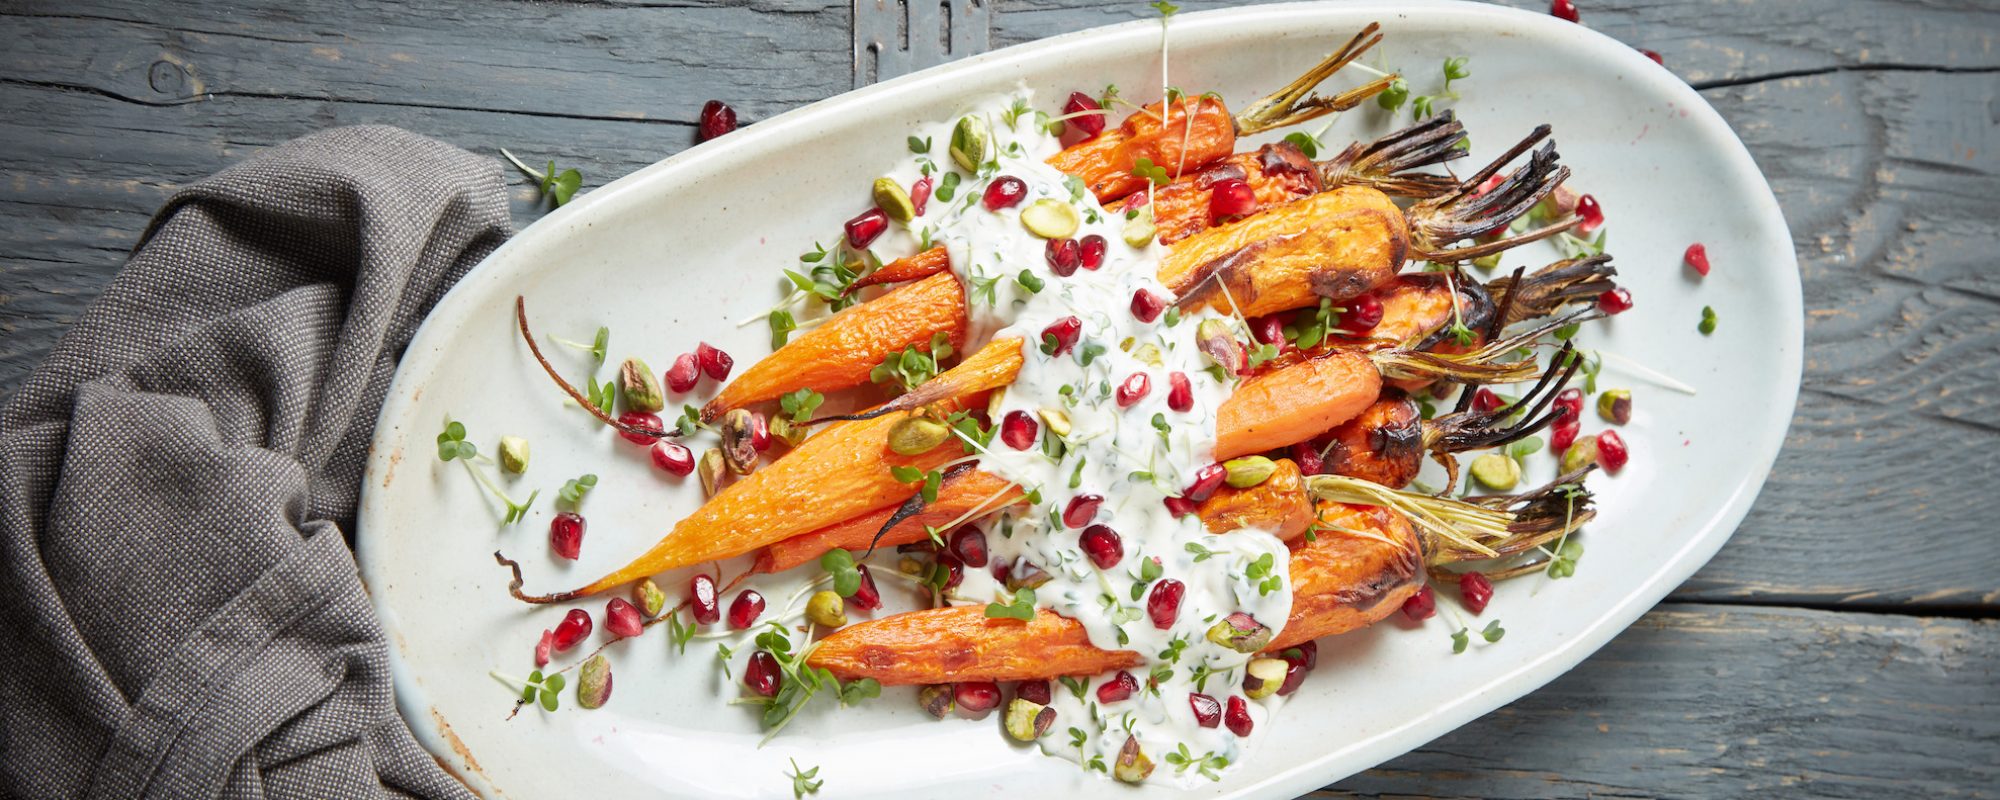 Roasted Carrots with Garlic Cress Sauce